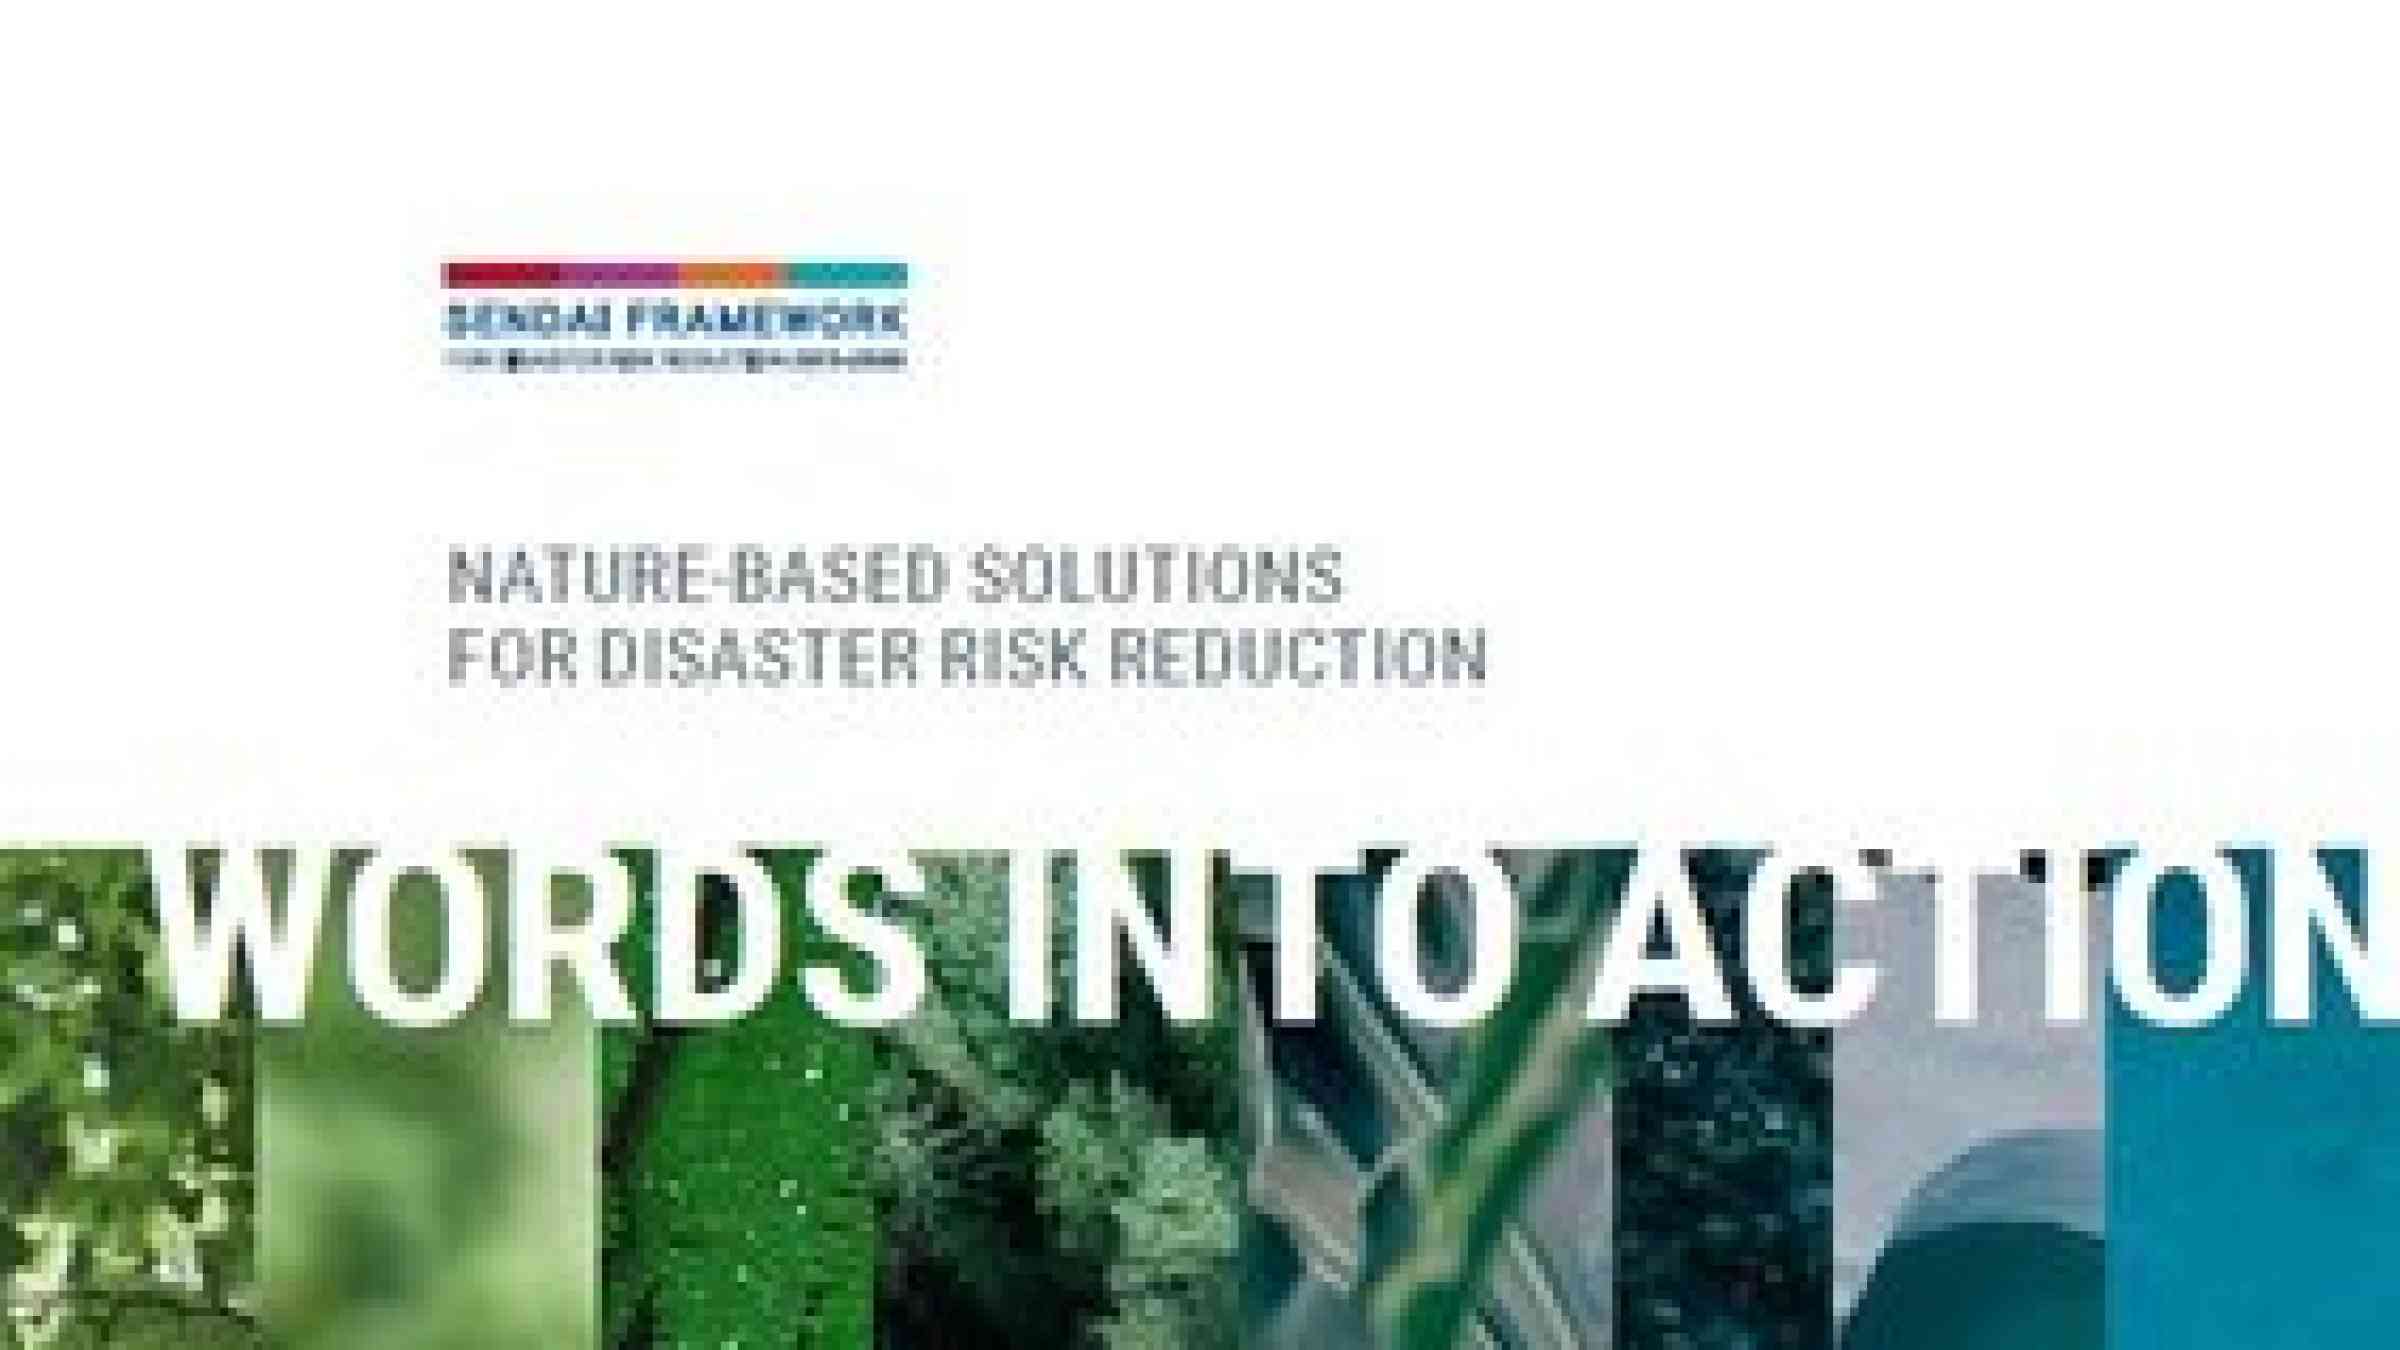 This is the cover of the WiA guide for Nature-based Solutions